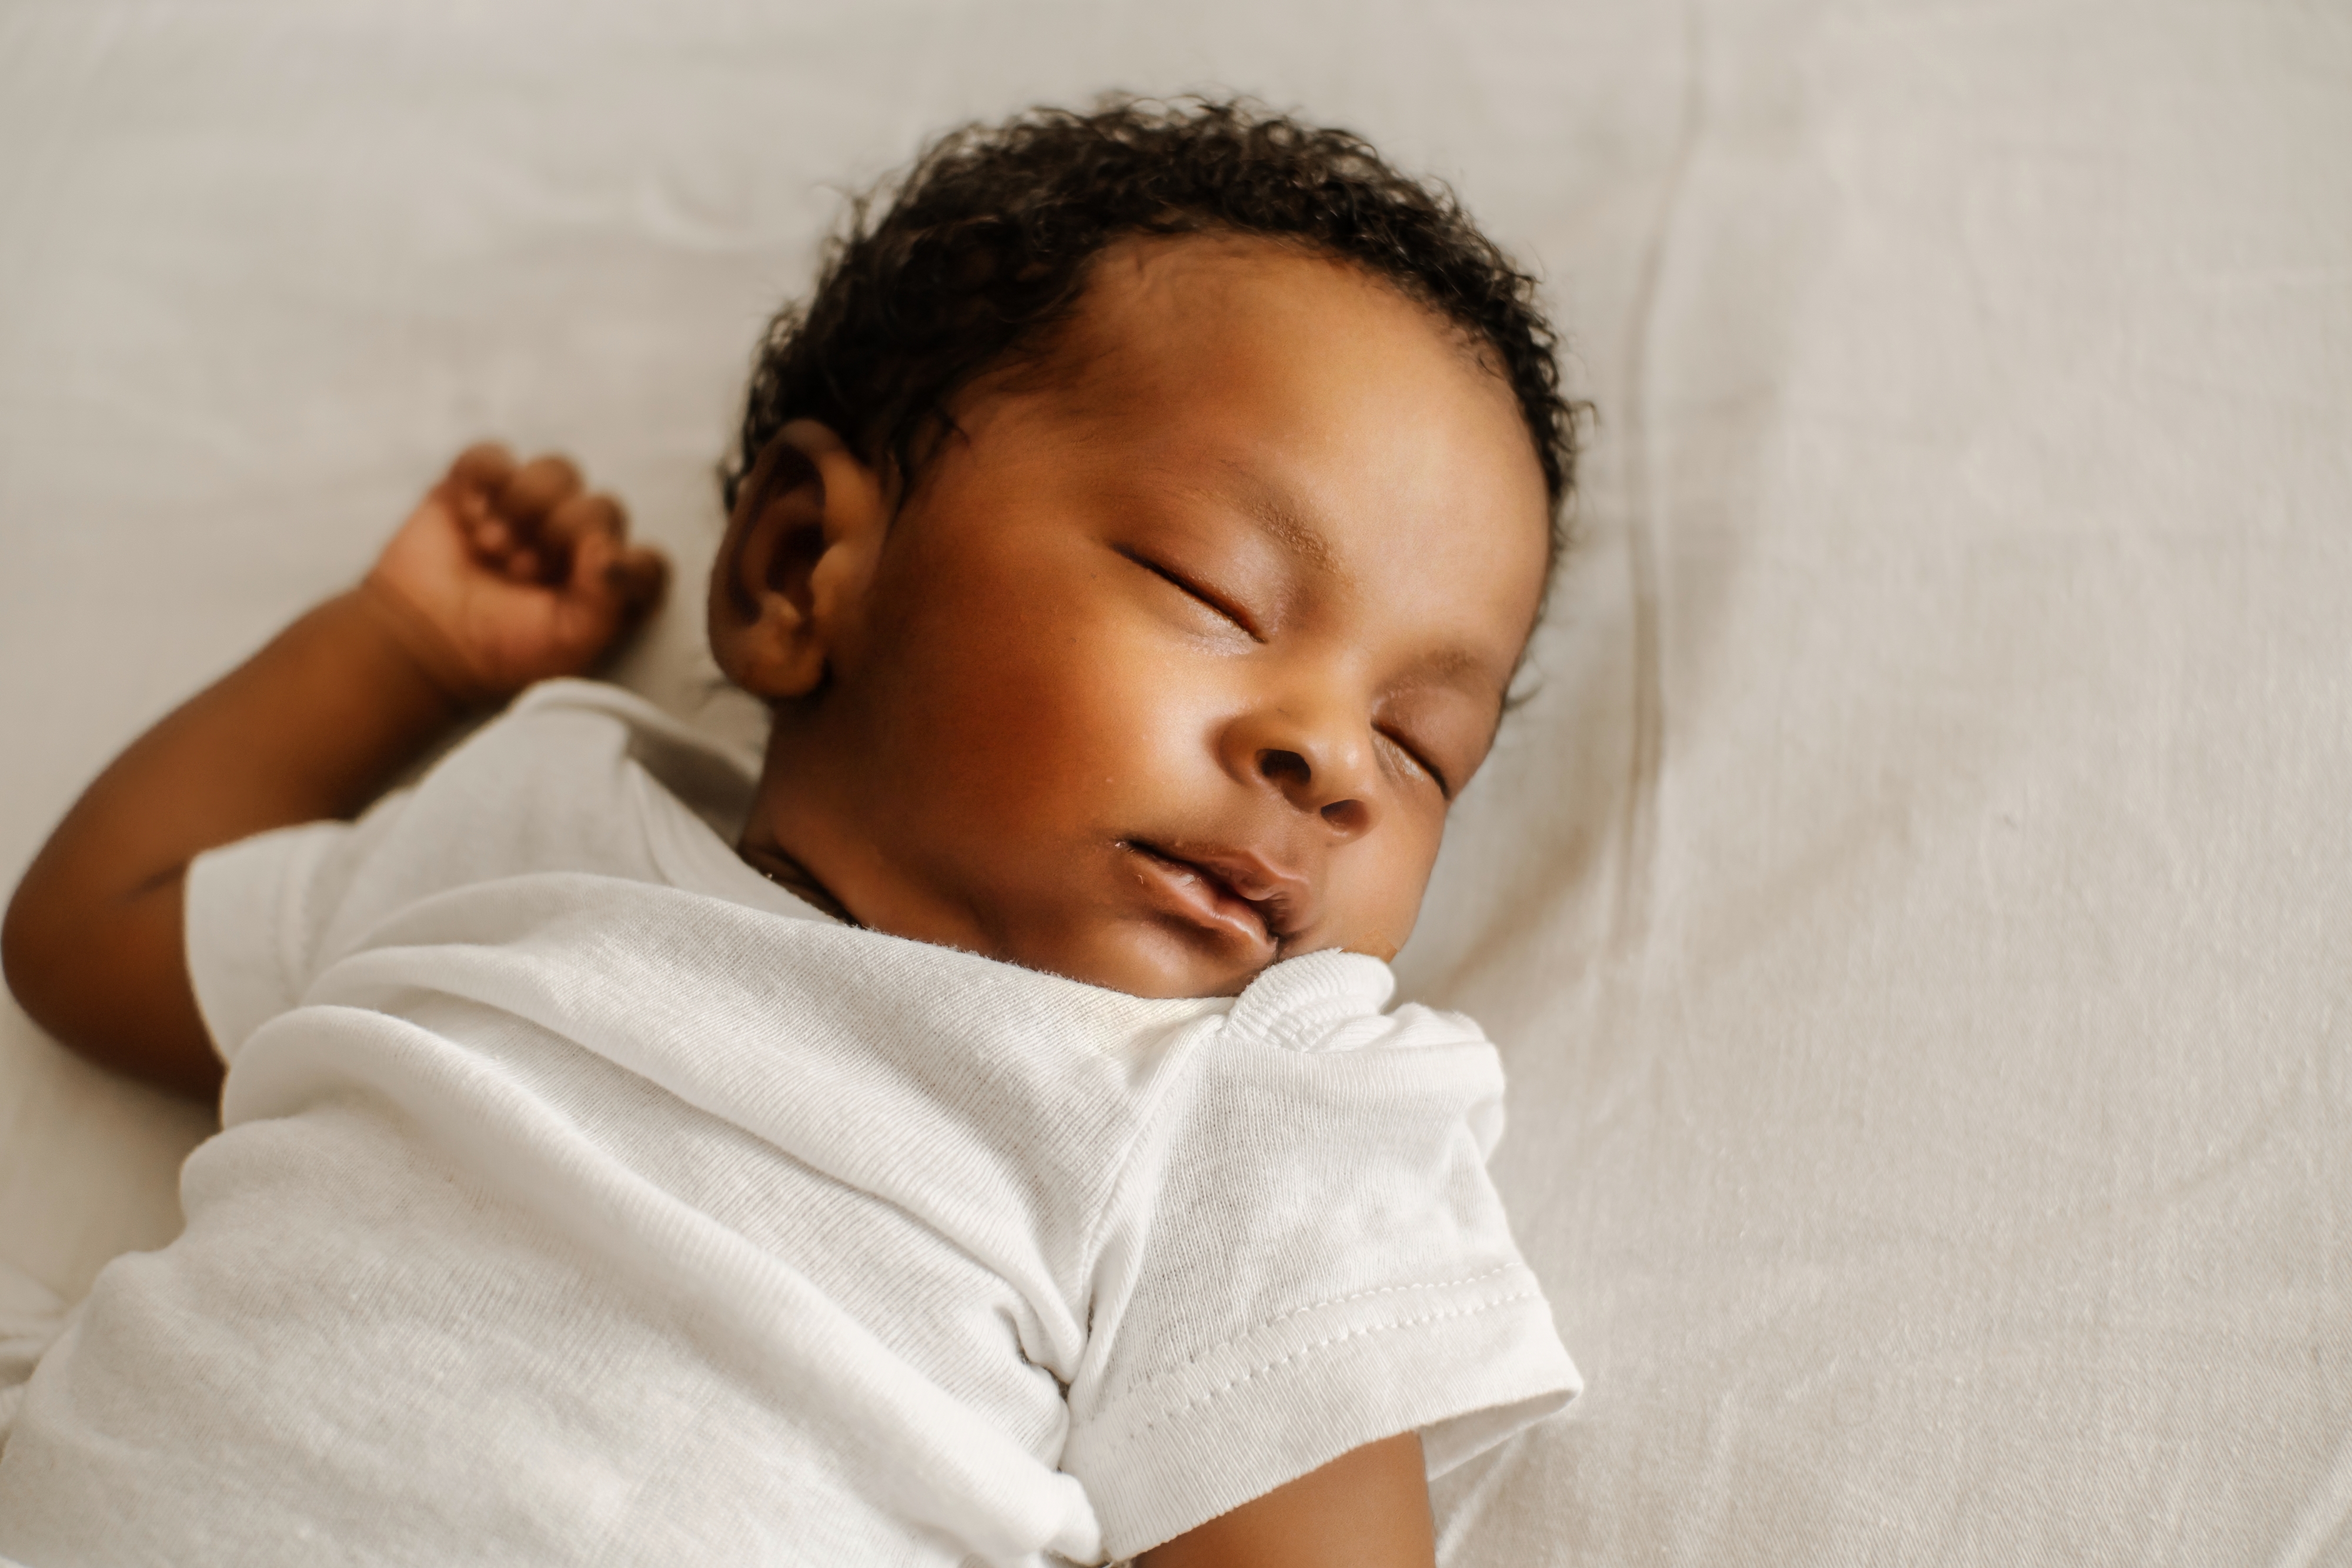 A baby sleeps peacefully on a soft surface, wearing a simple white outfit